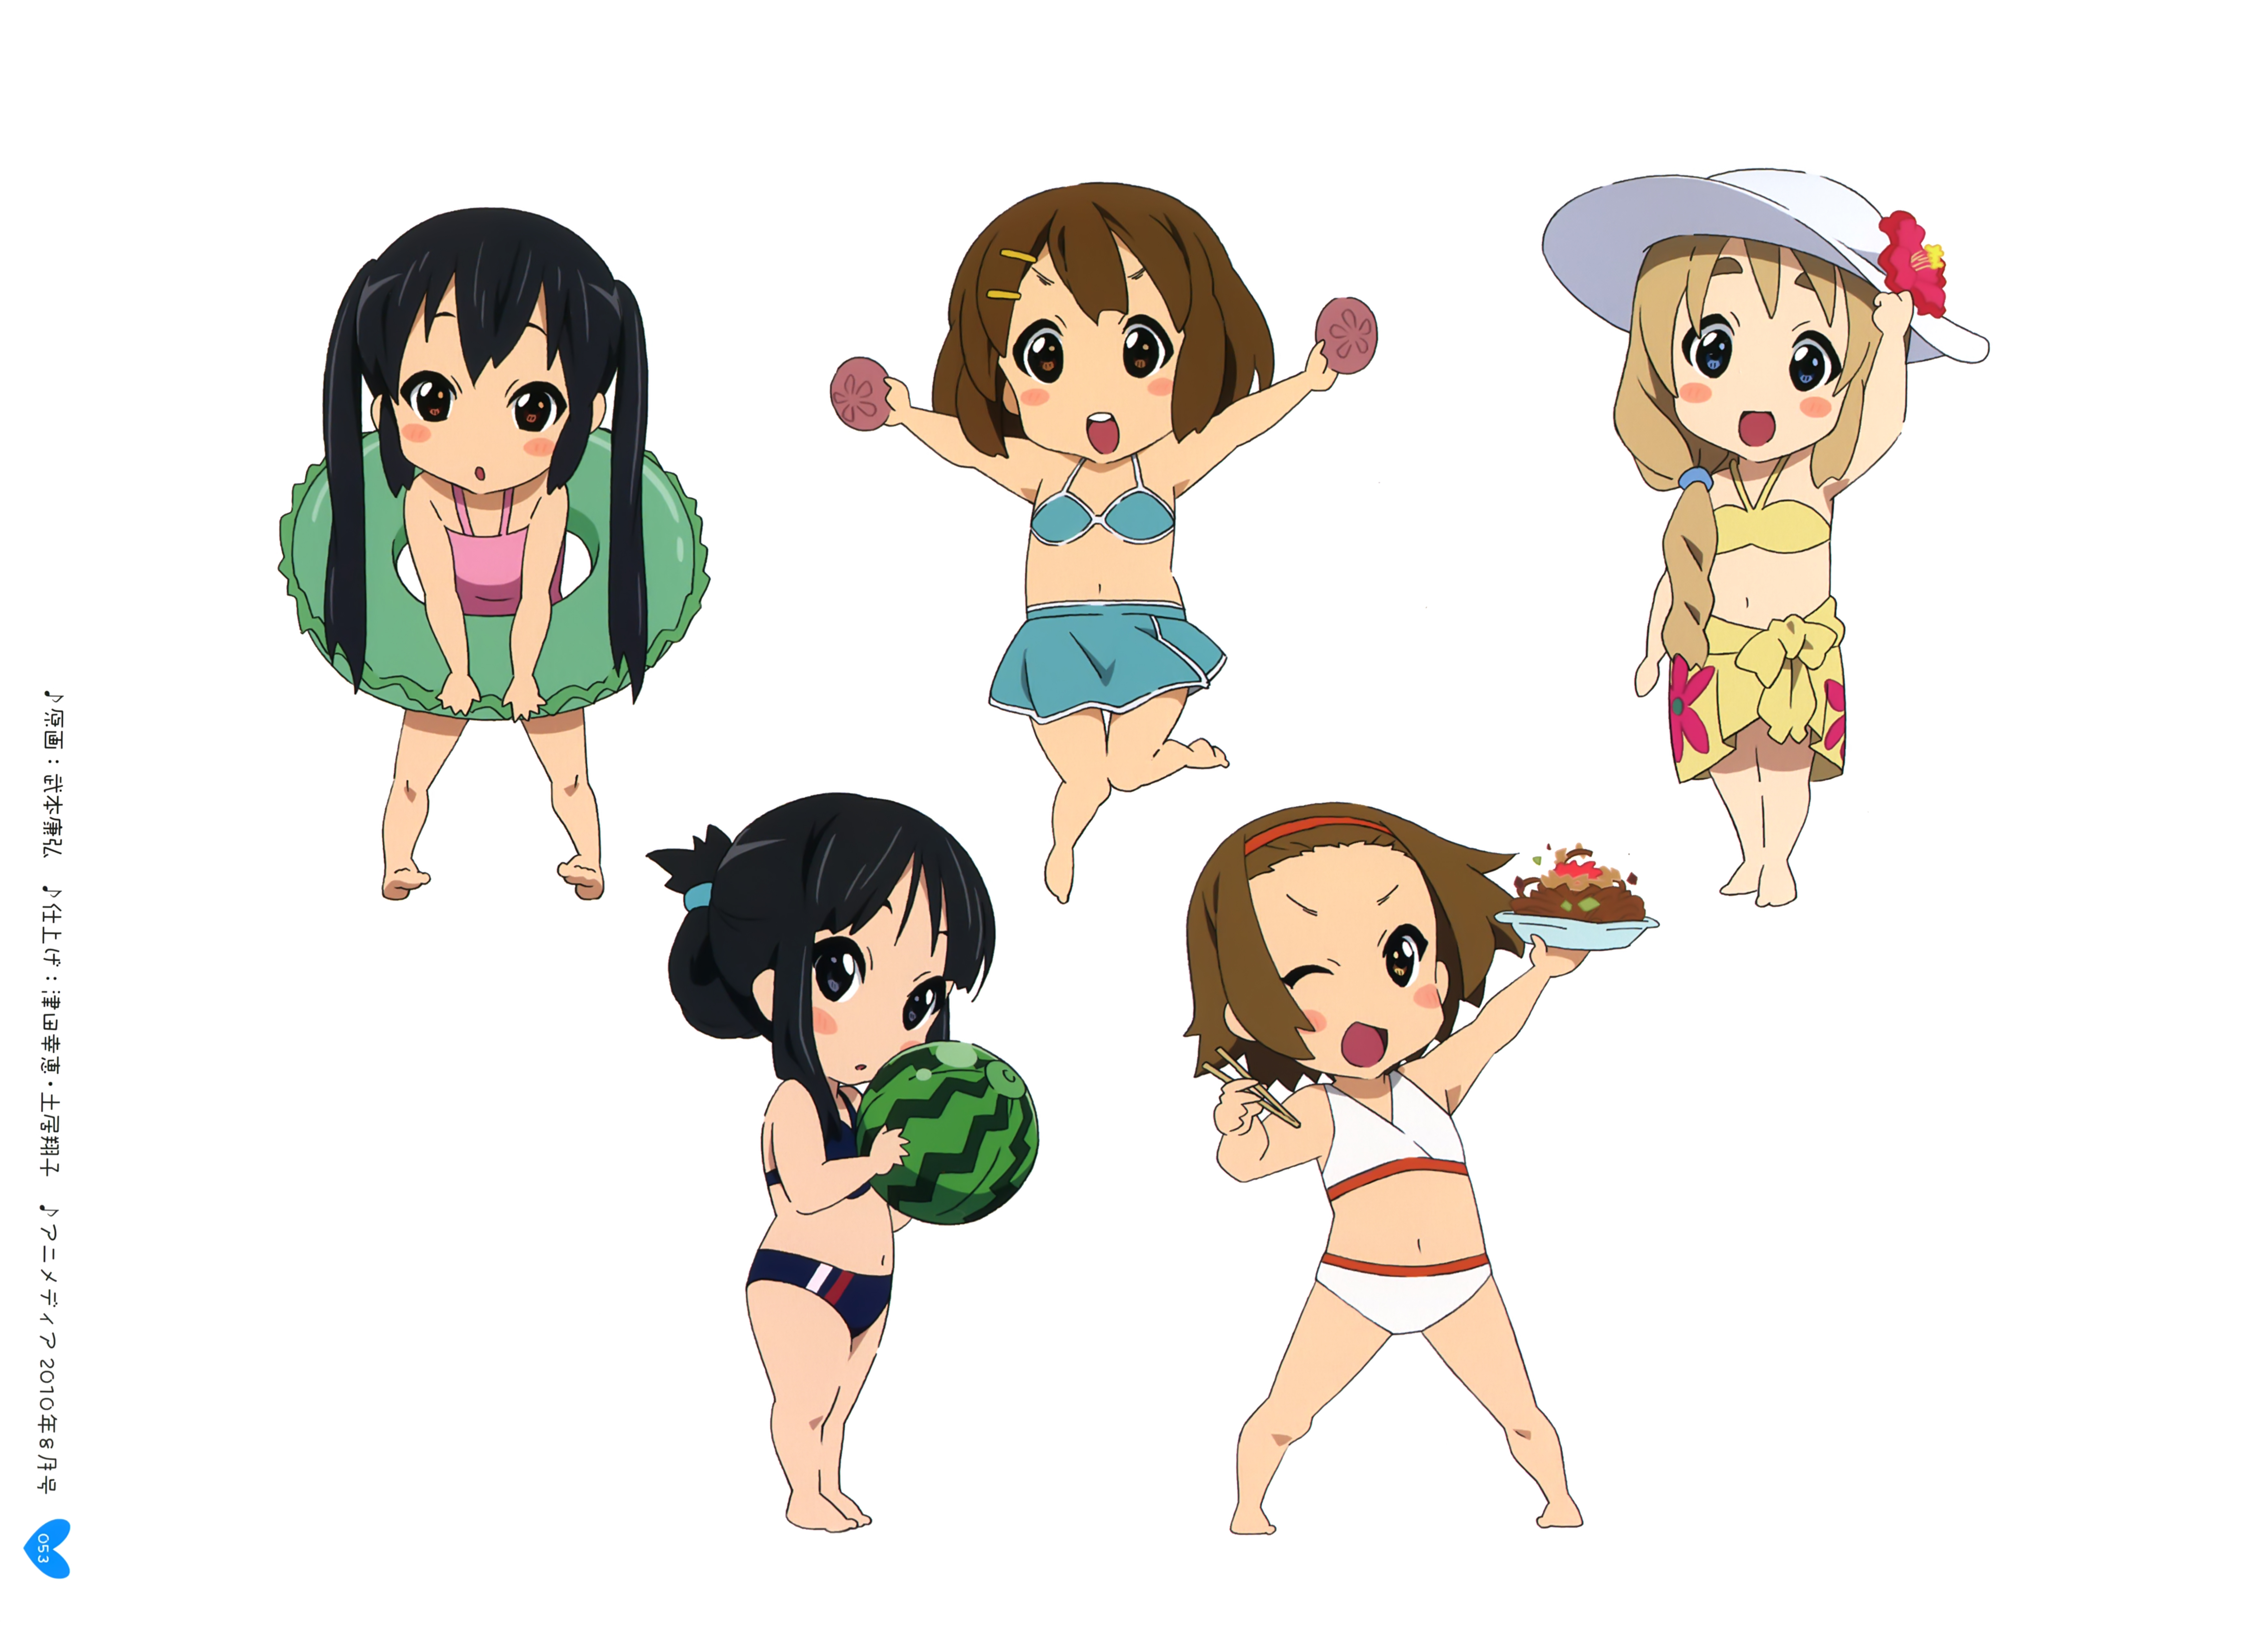 Chibi K-ON! Characters - Other & Anime Background Wallpapers on